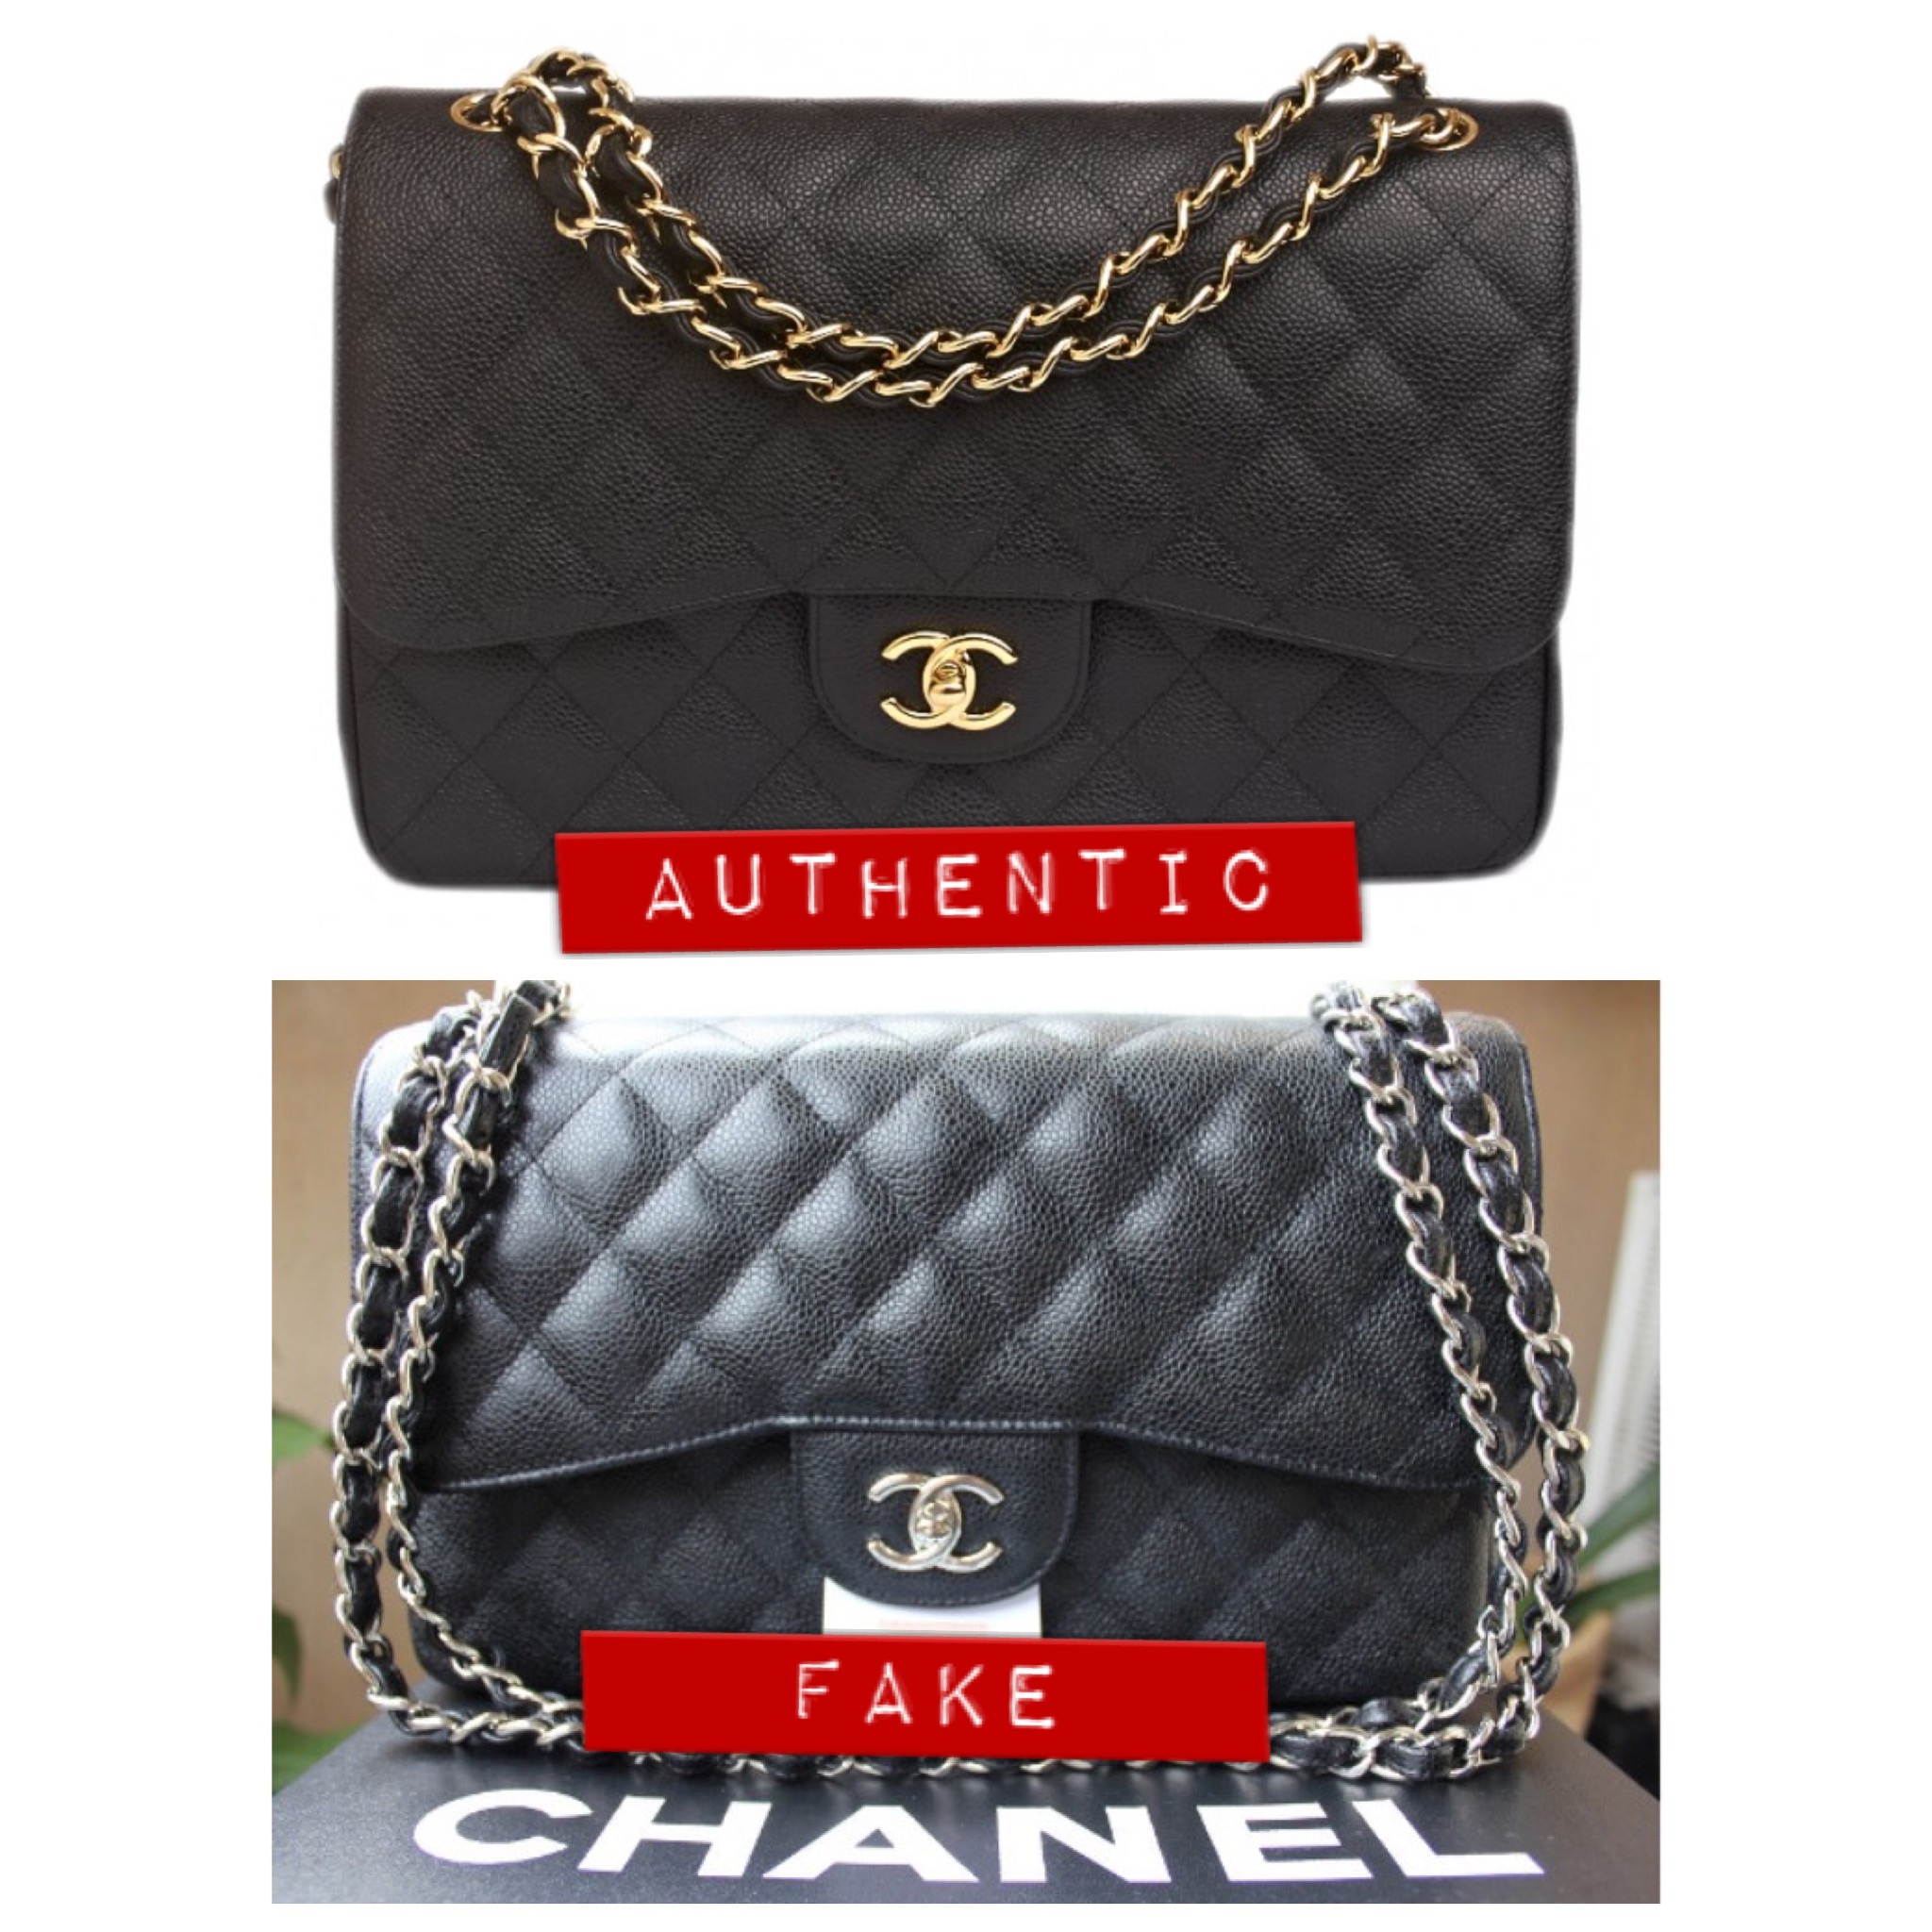 how can you tell if a chanel purse is real